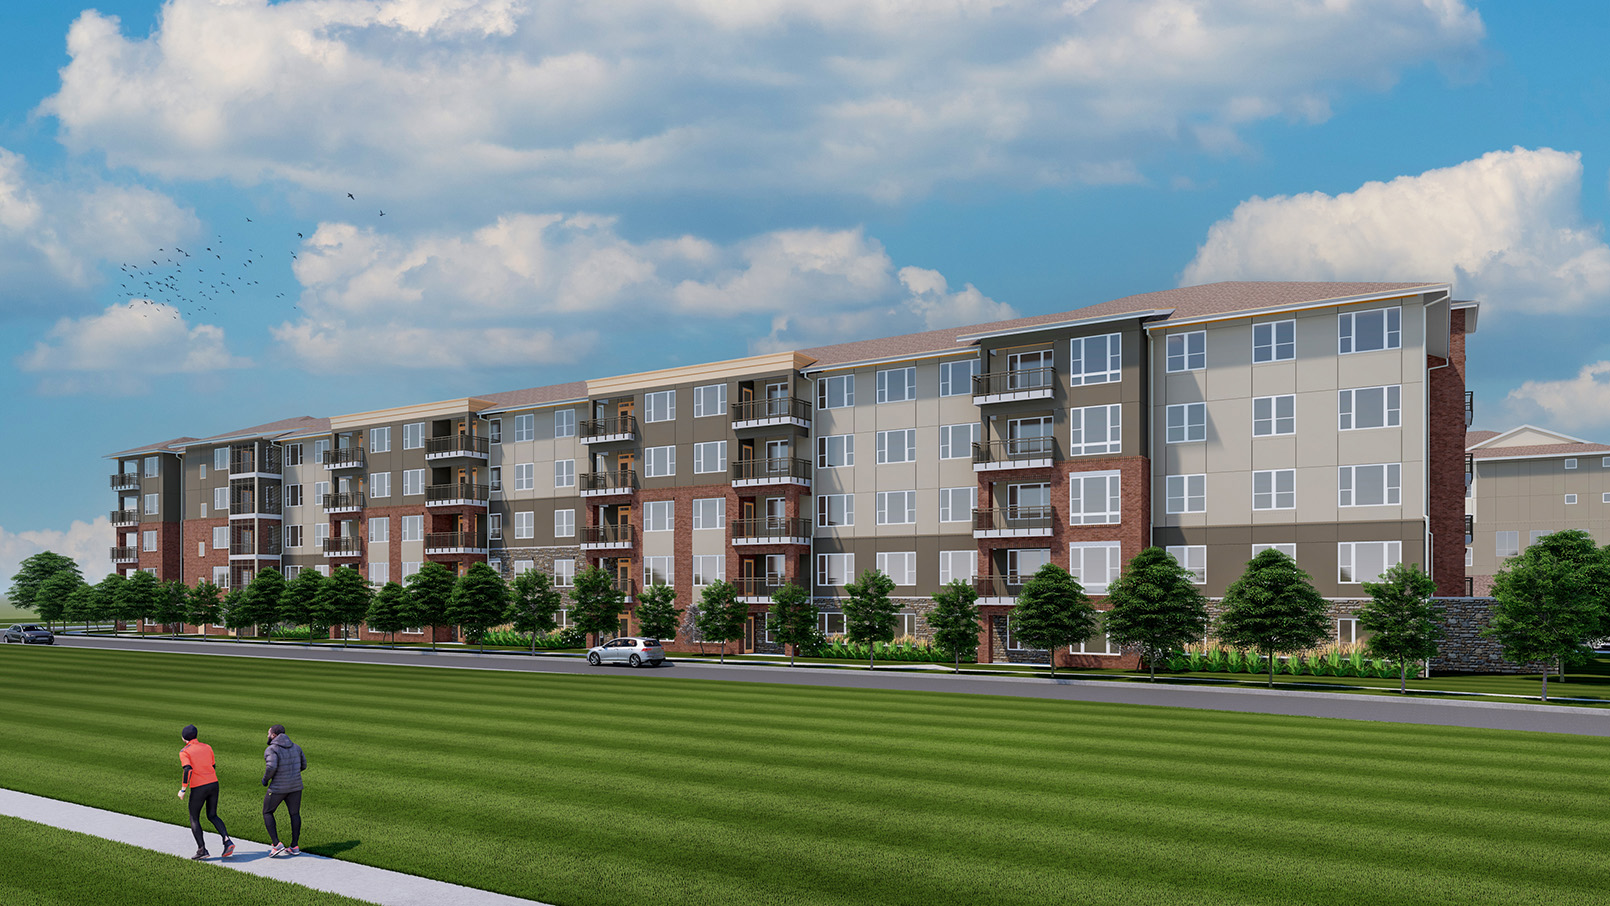 Conceptual rendering of the exterior of an Erickson Senior Living community building. 